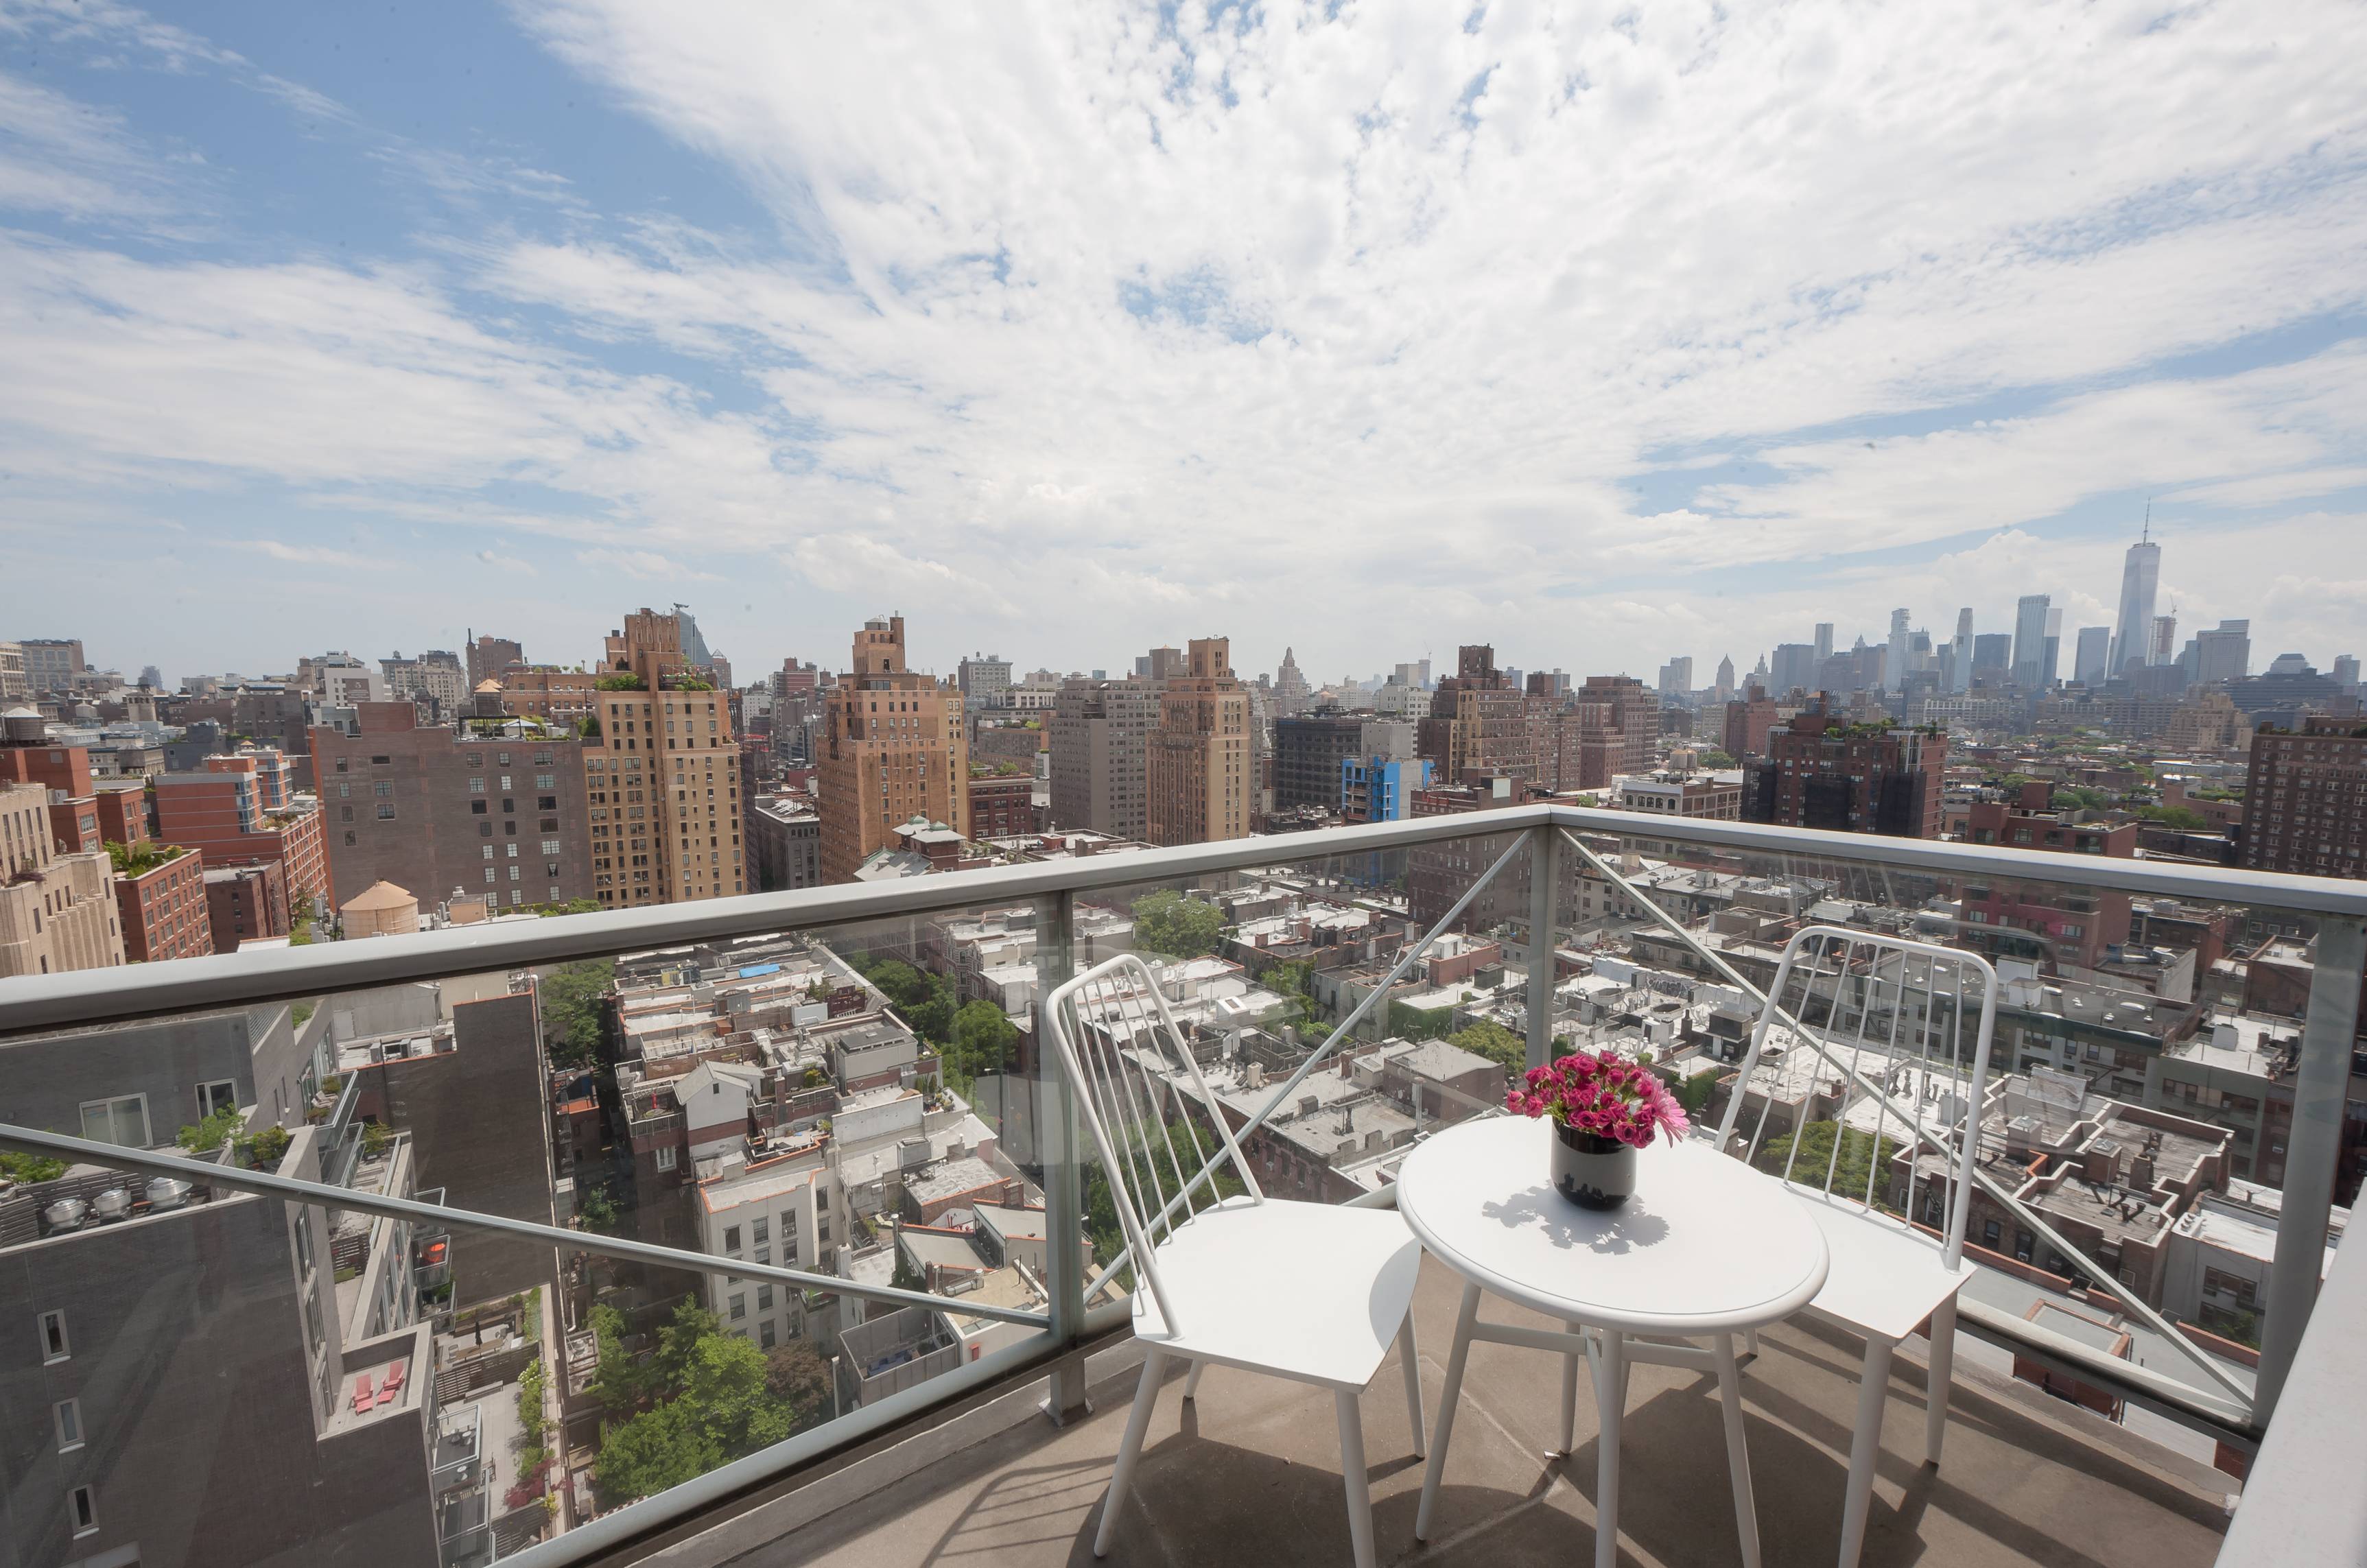 270 WEST 17TH CHIC 1000sf CORNER ONE BEDROOM PENTHOUSE WITH JAW DROPPING VIEWS/ NEW DESIGNER RENOVATIONS